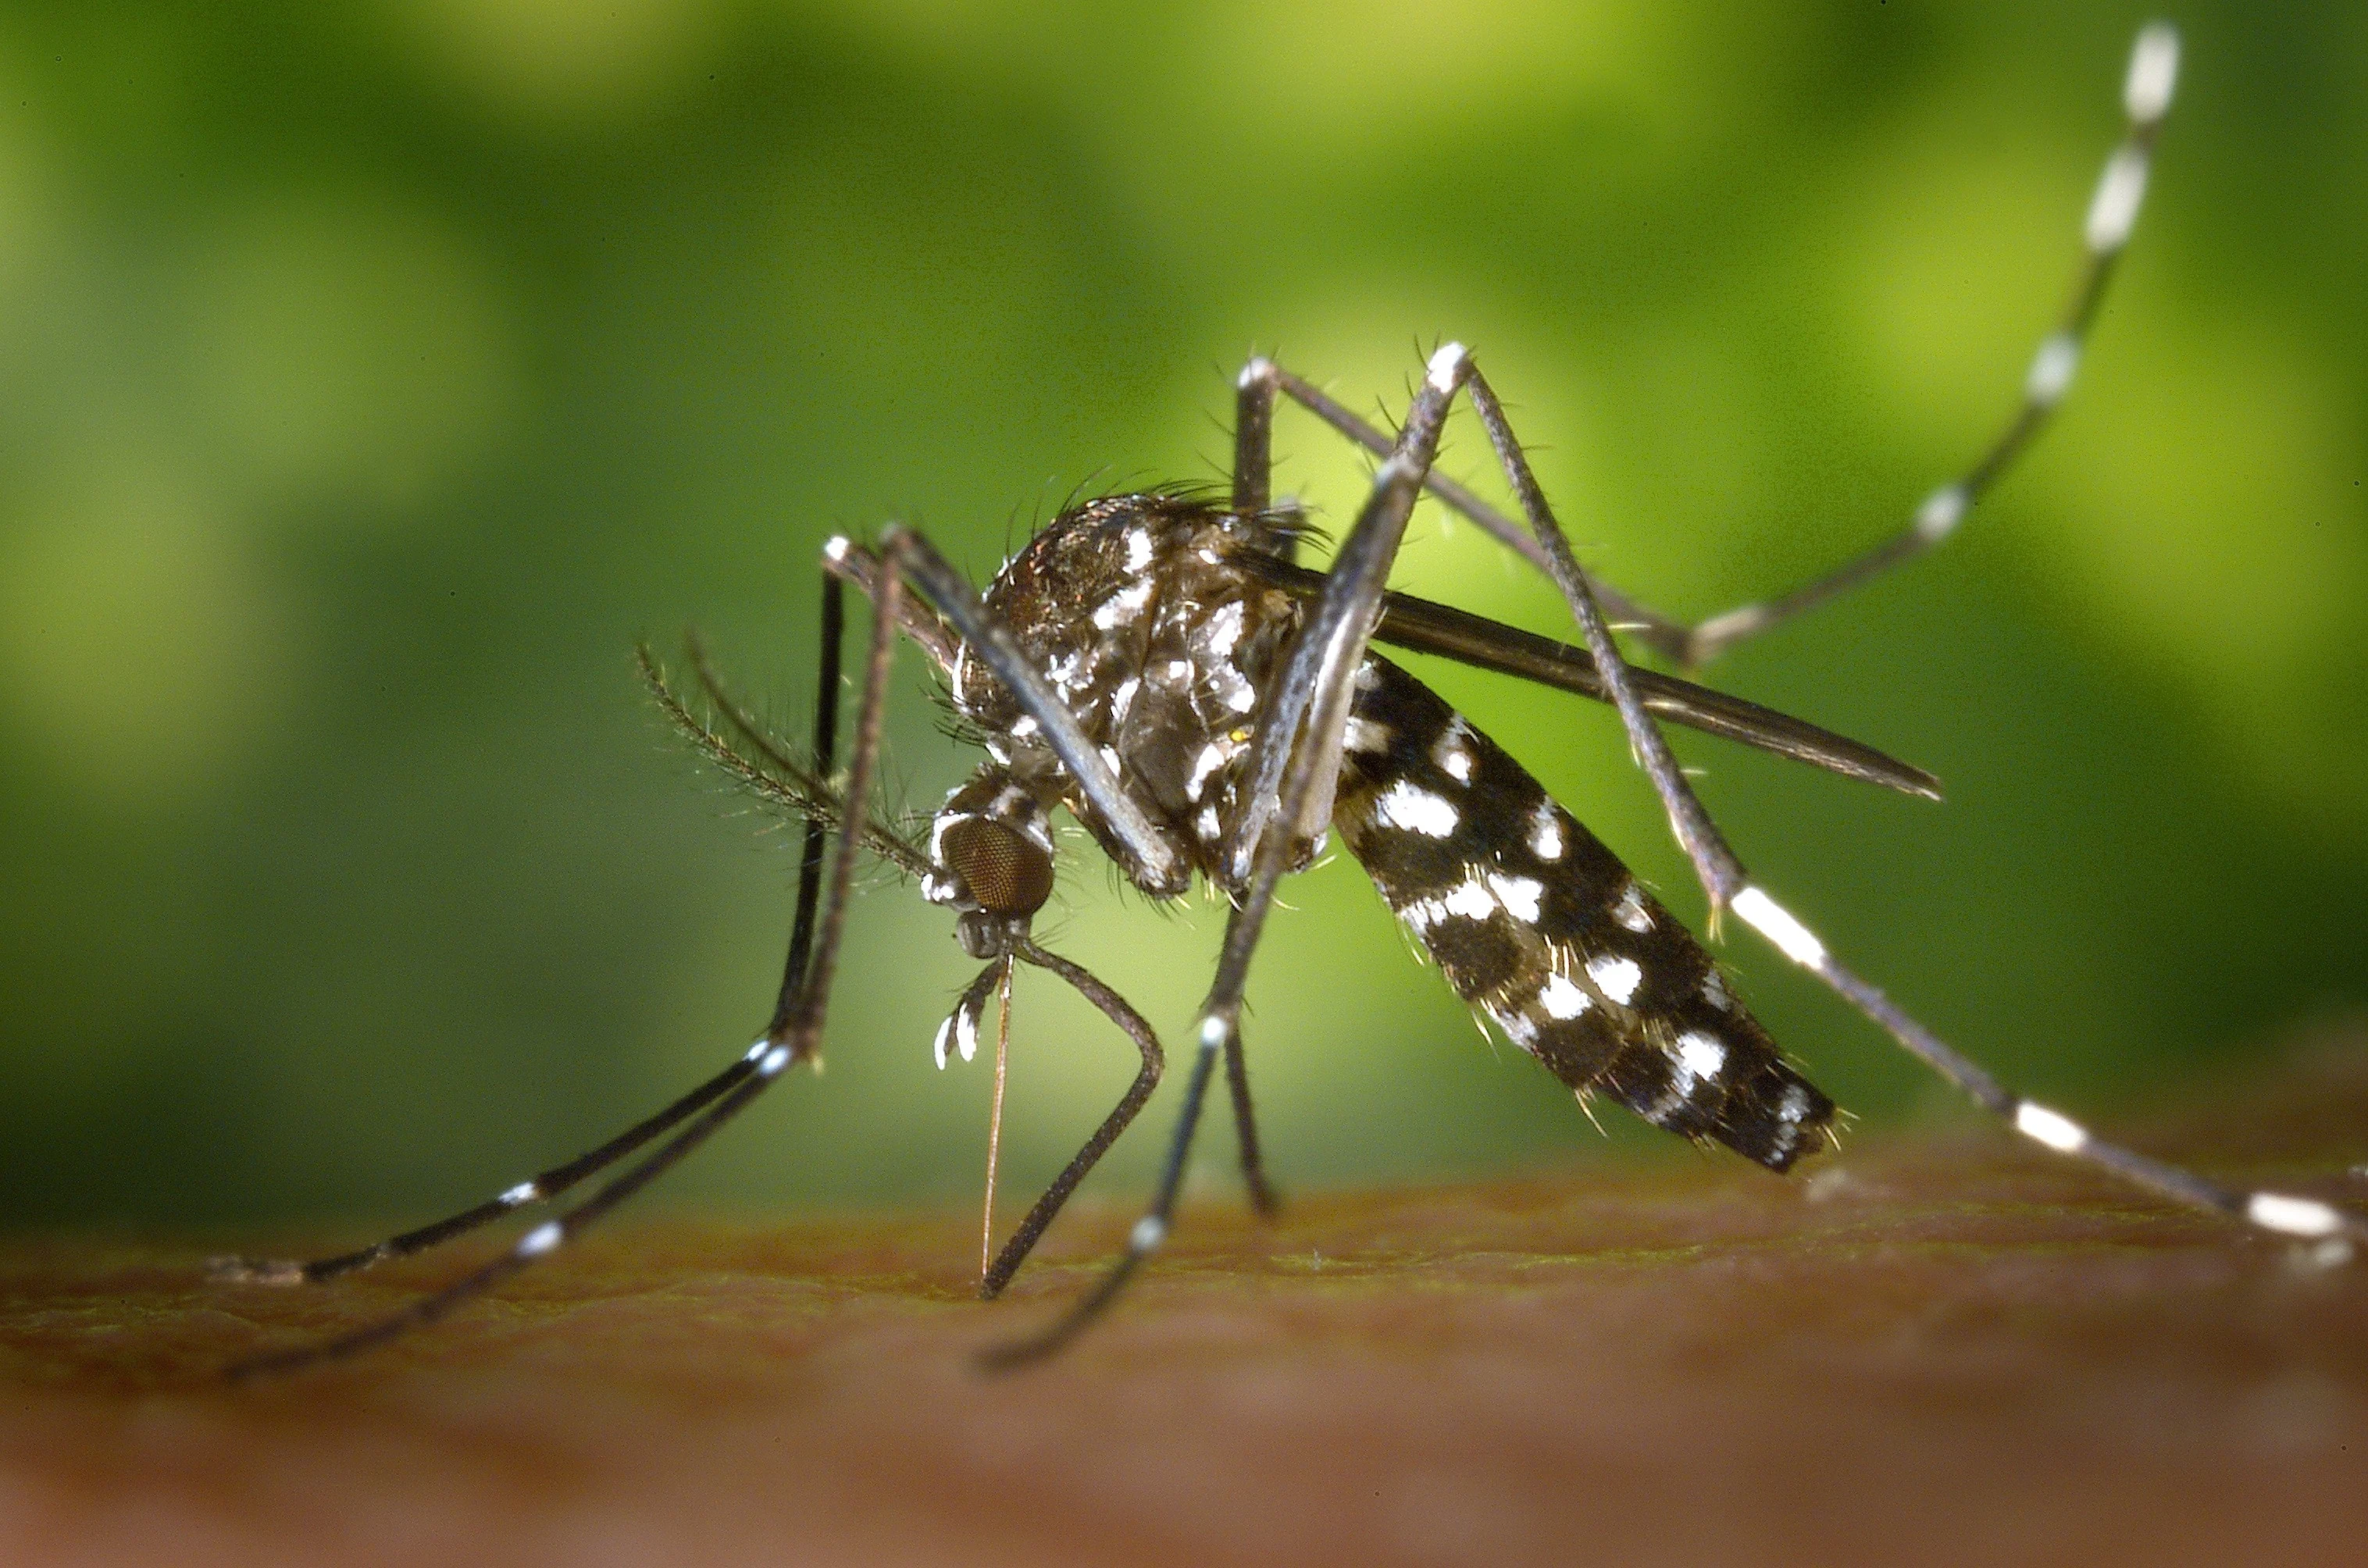 Here's what you need to prepare for the return of mosquitos